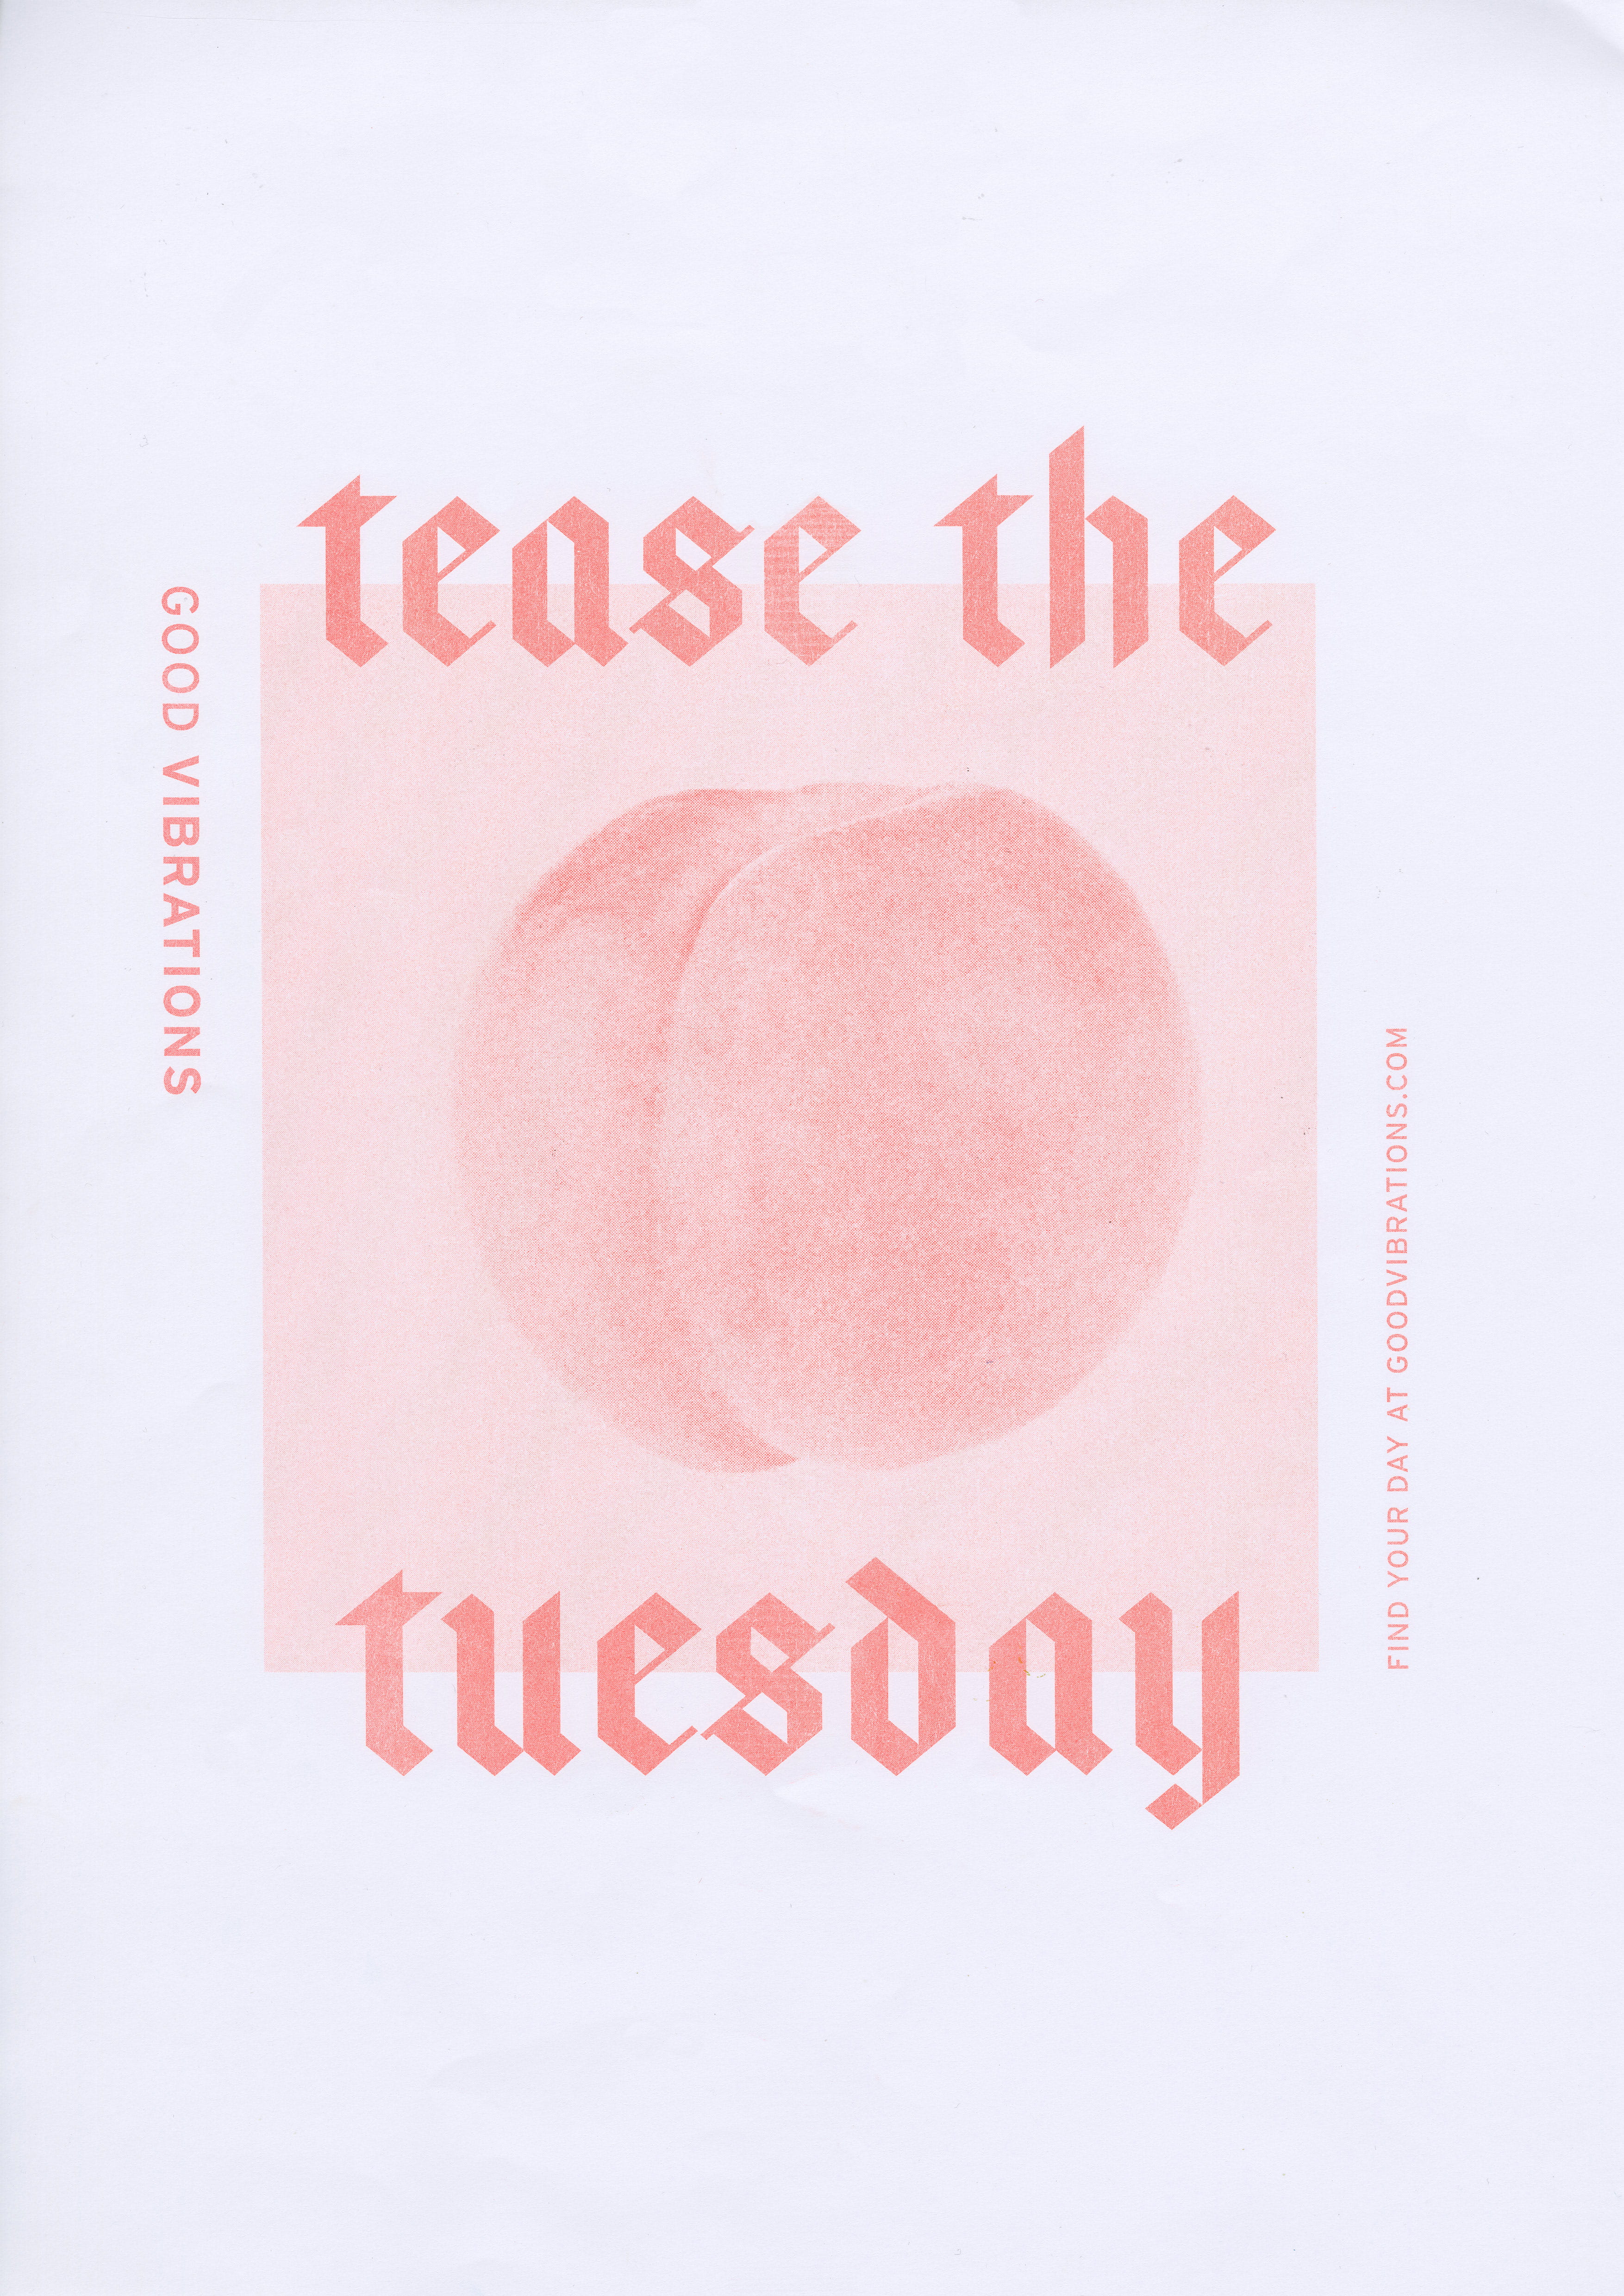 Tease the tuesday poster in peach tones with a peach featured